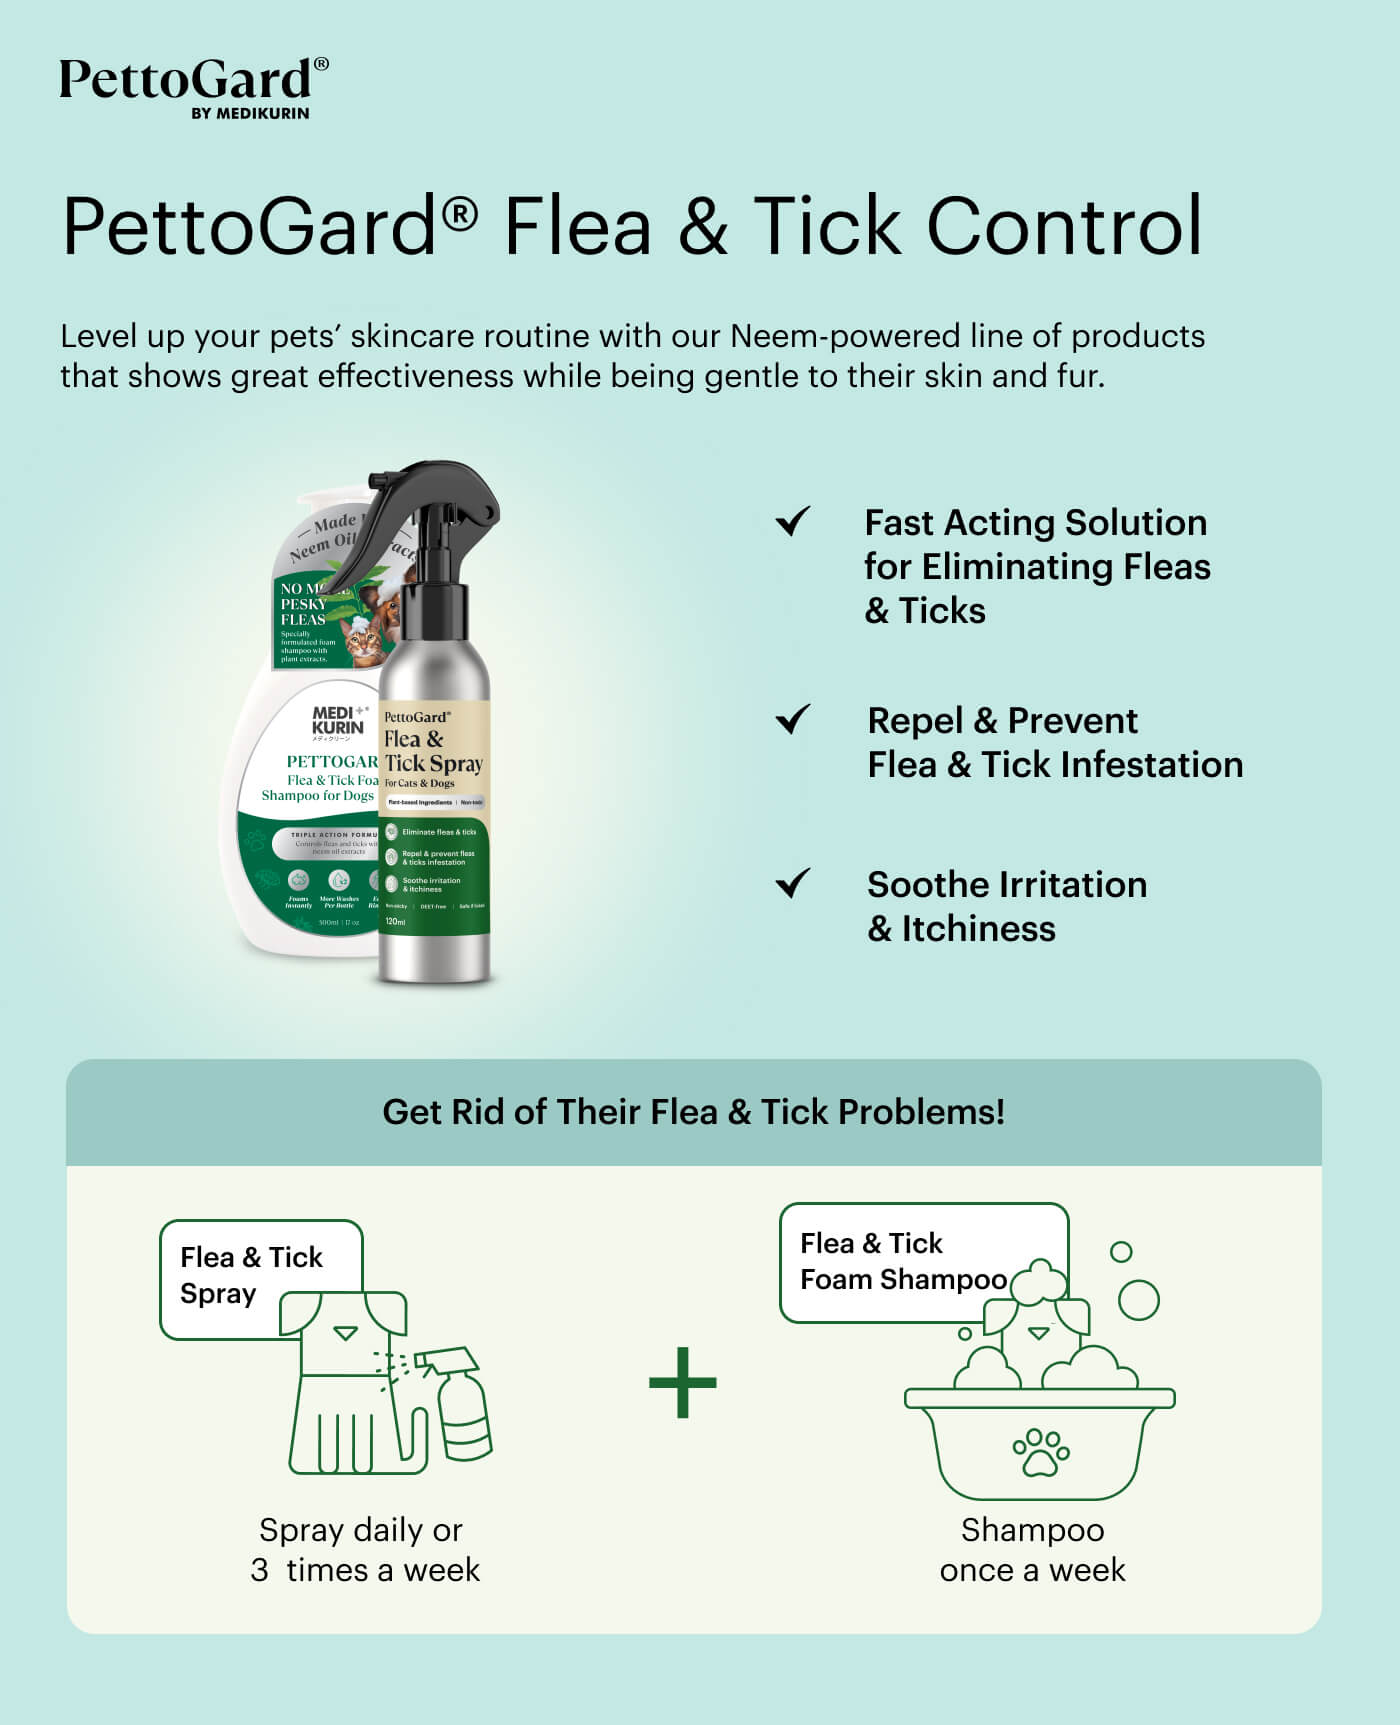 Use PettoGard Flea and Tick Spray and Flea and Tick Foam Shampoo together in your pet's skincare routine